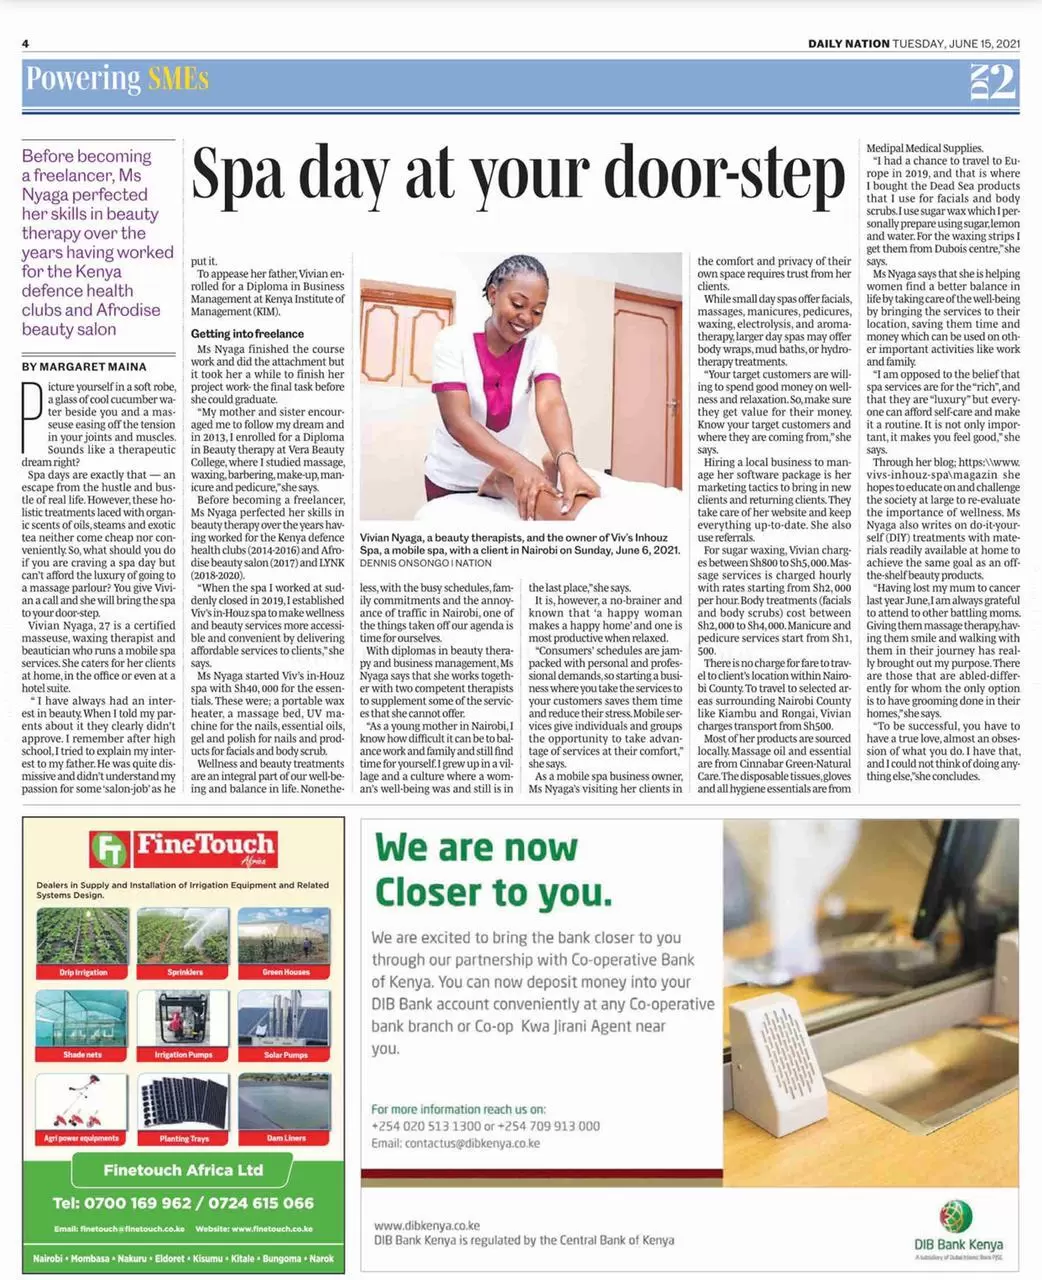 Newspaper feature; A spa day at your doorstep - Viv's in-Houz Spa Nairobi